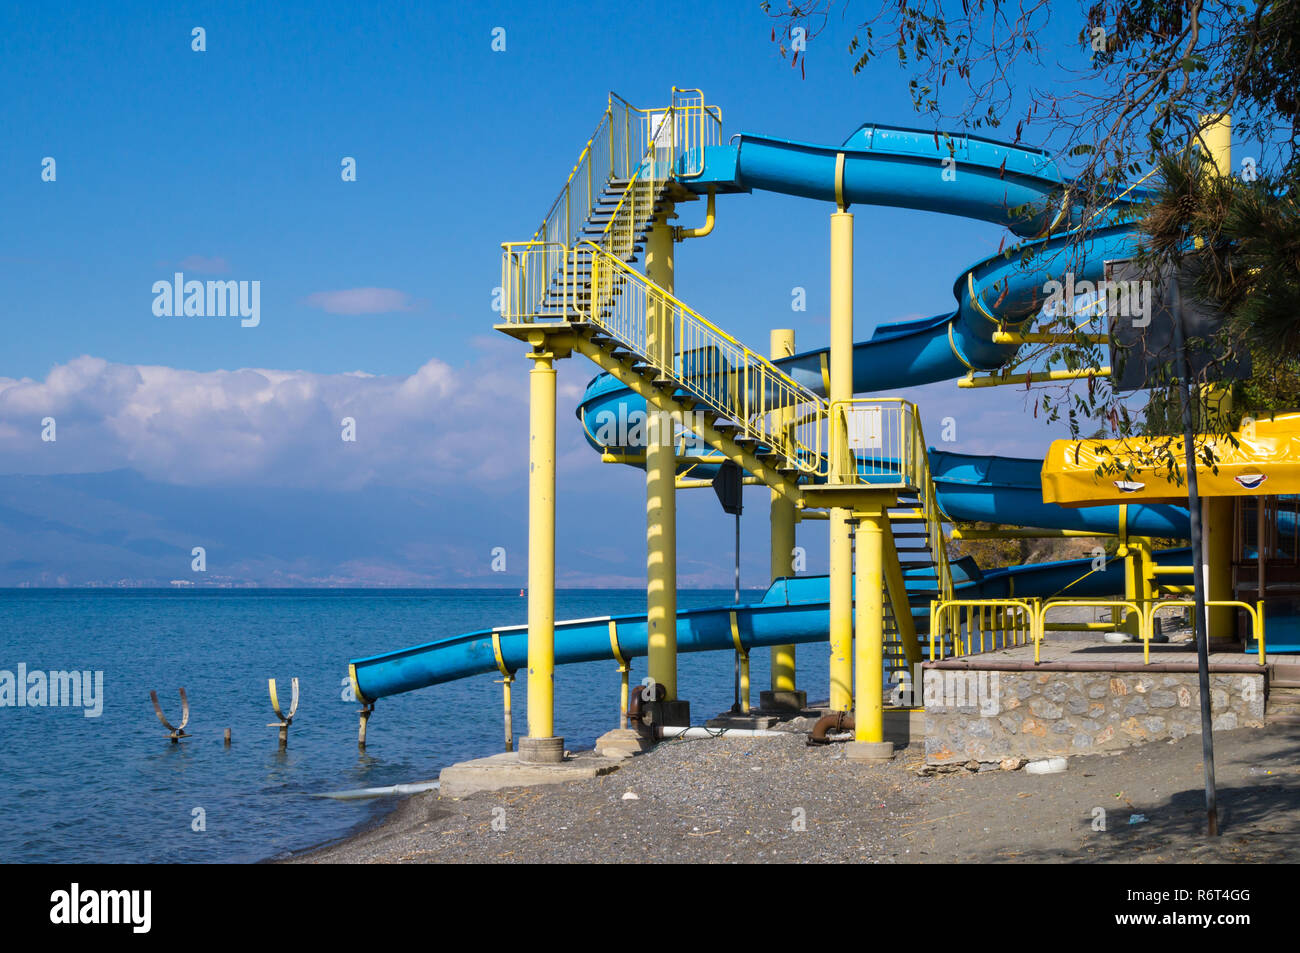 The end of summer season; the water slide into the lake of Ohrid, Macedonia, is getting closed. Stock Photo